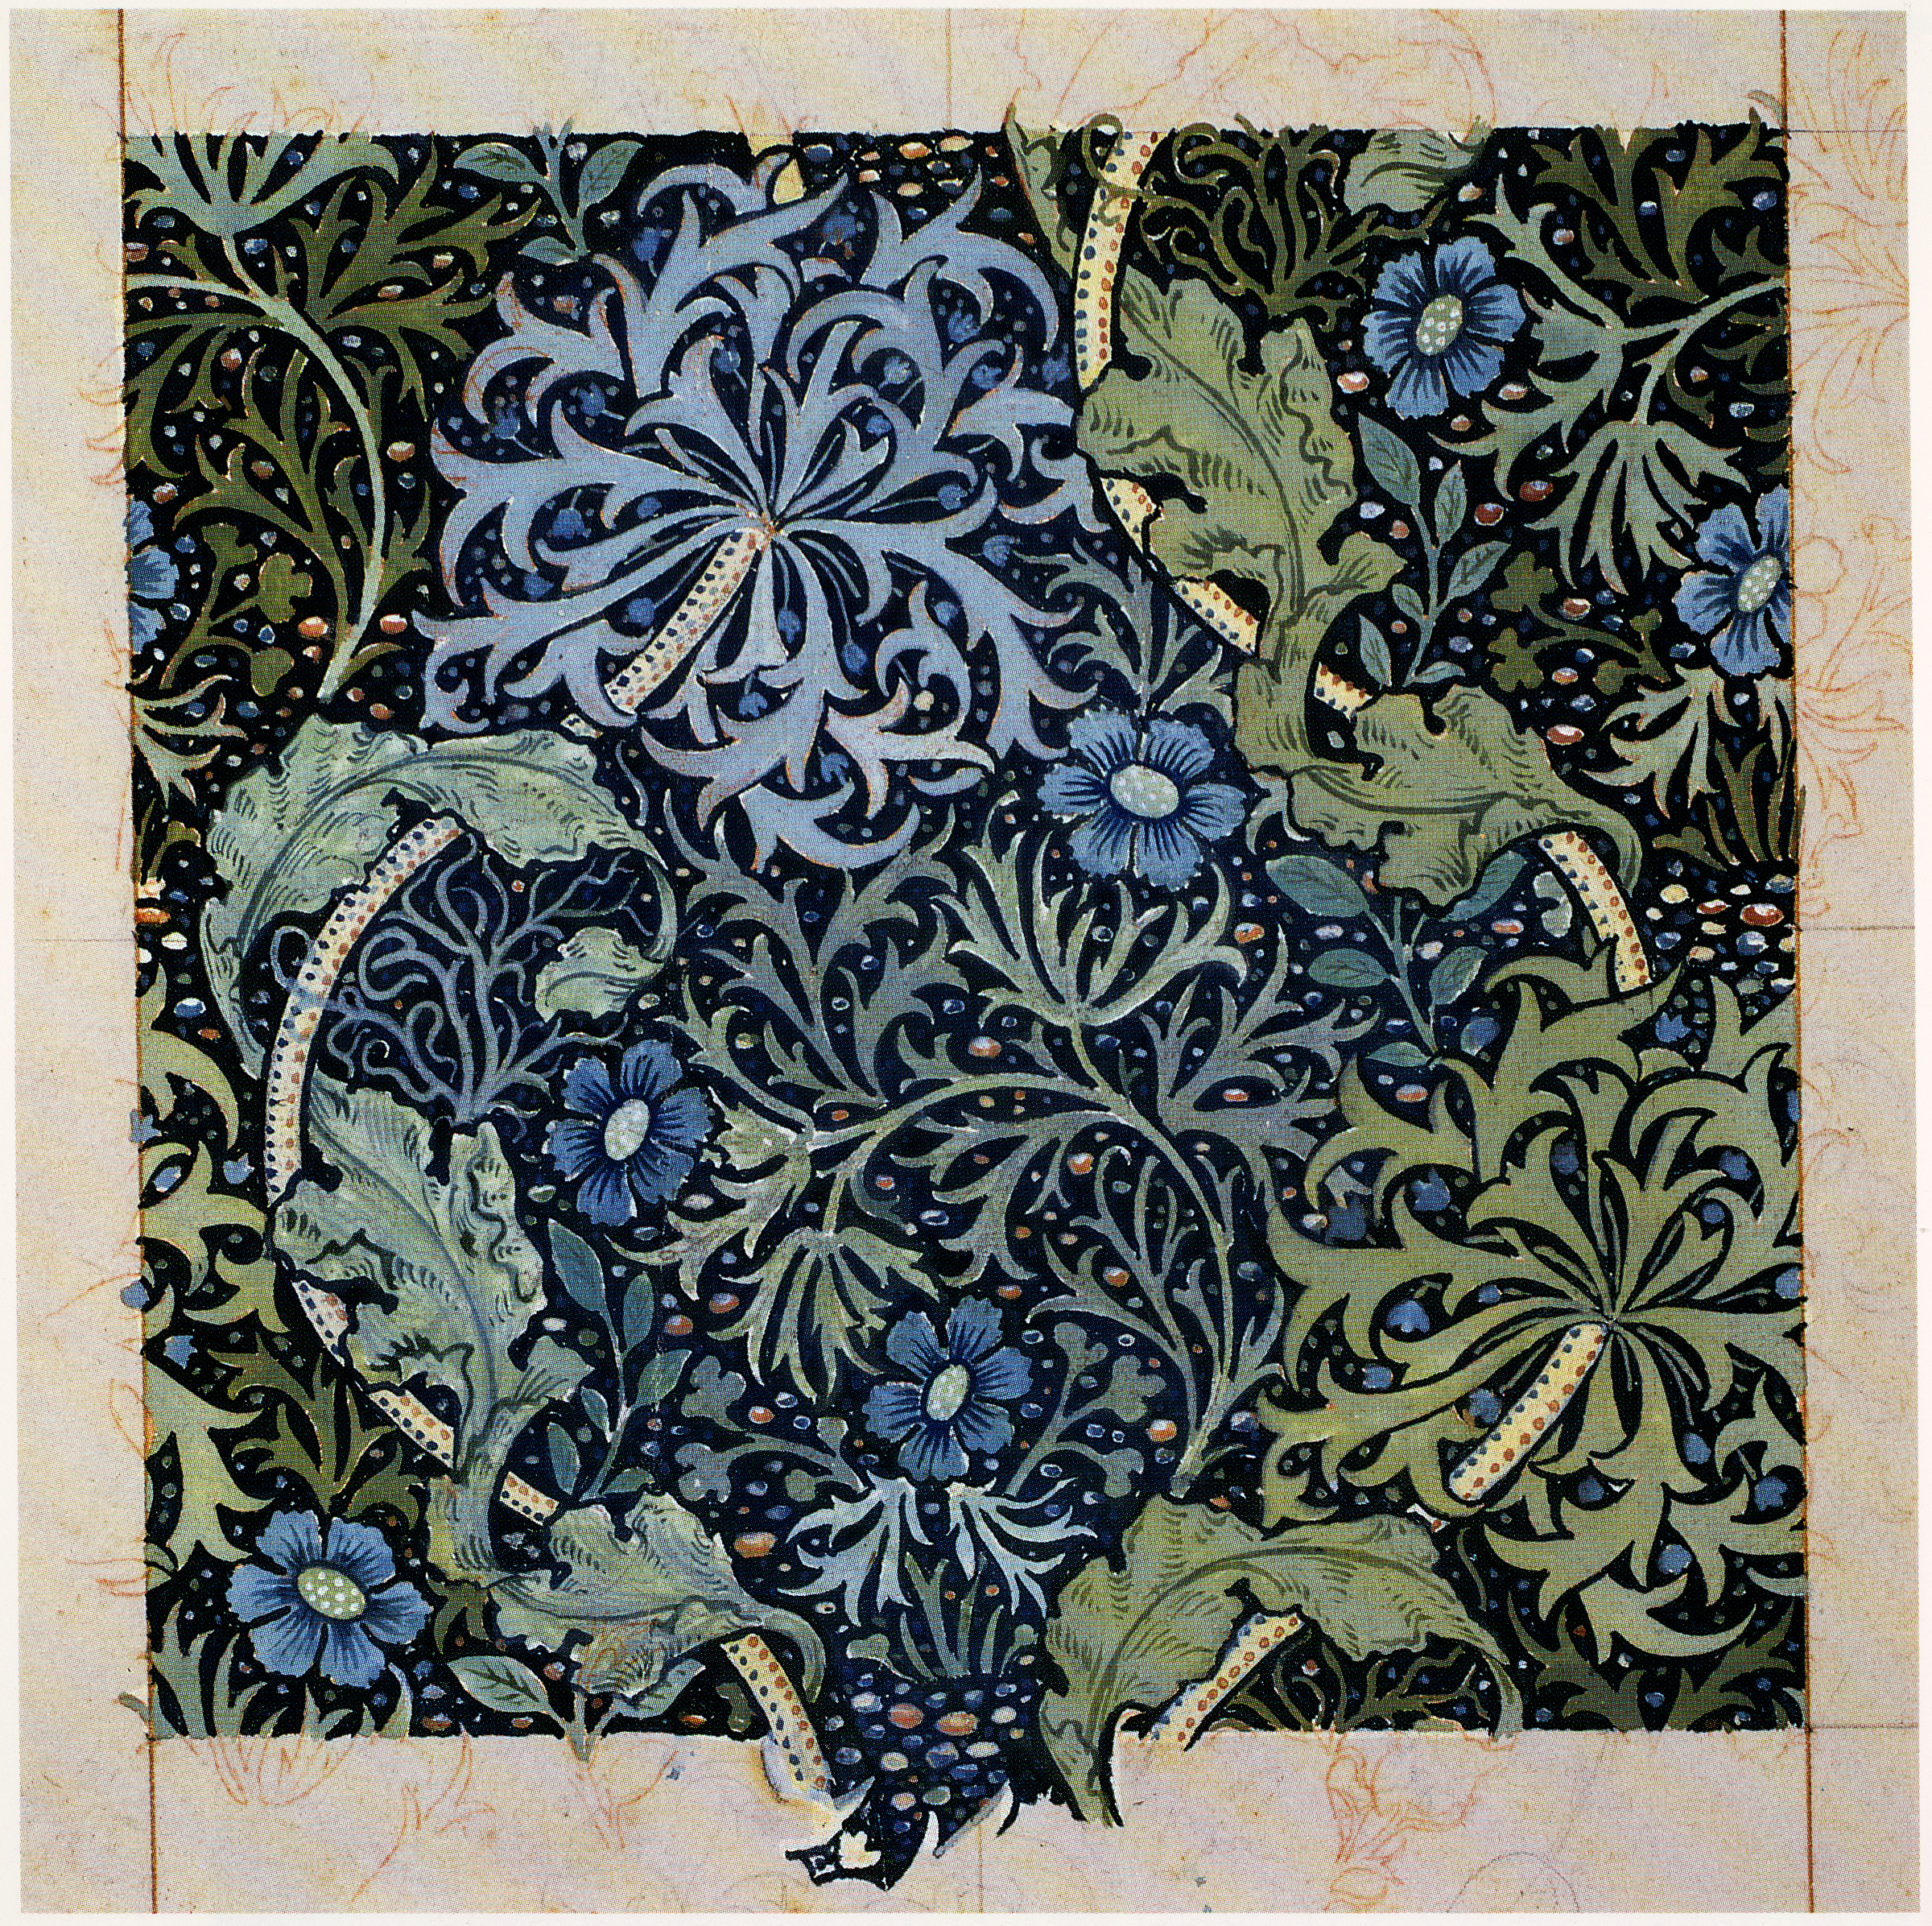 Seaweed by  Morris & Co - ca. 1900 - 14.1 × 13.3 cm The Huntington Library, Art Collections and Botanical Gardens